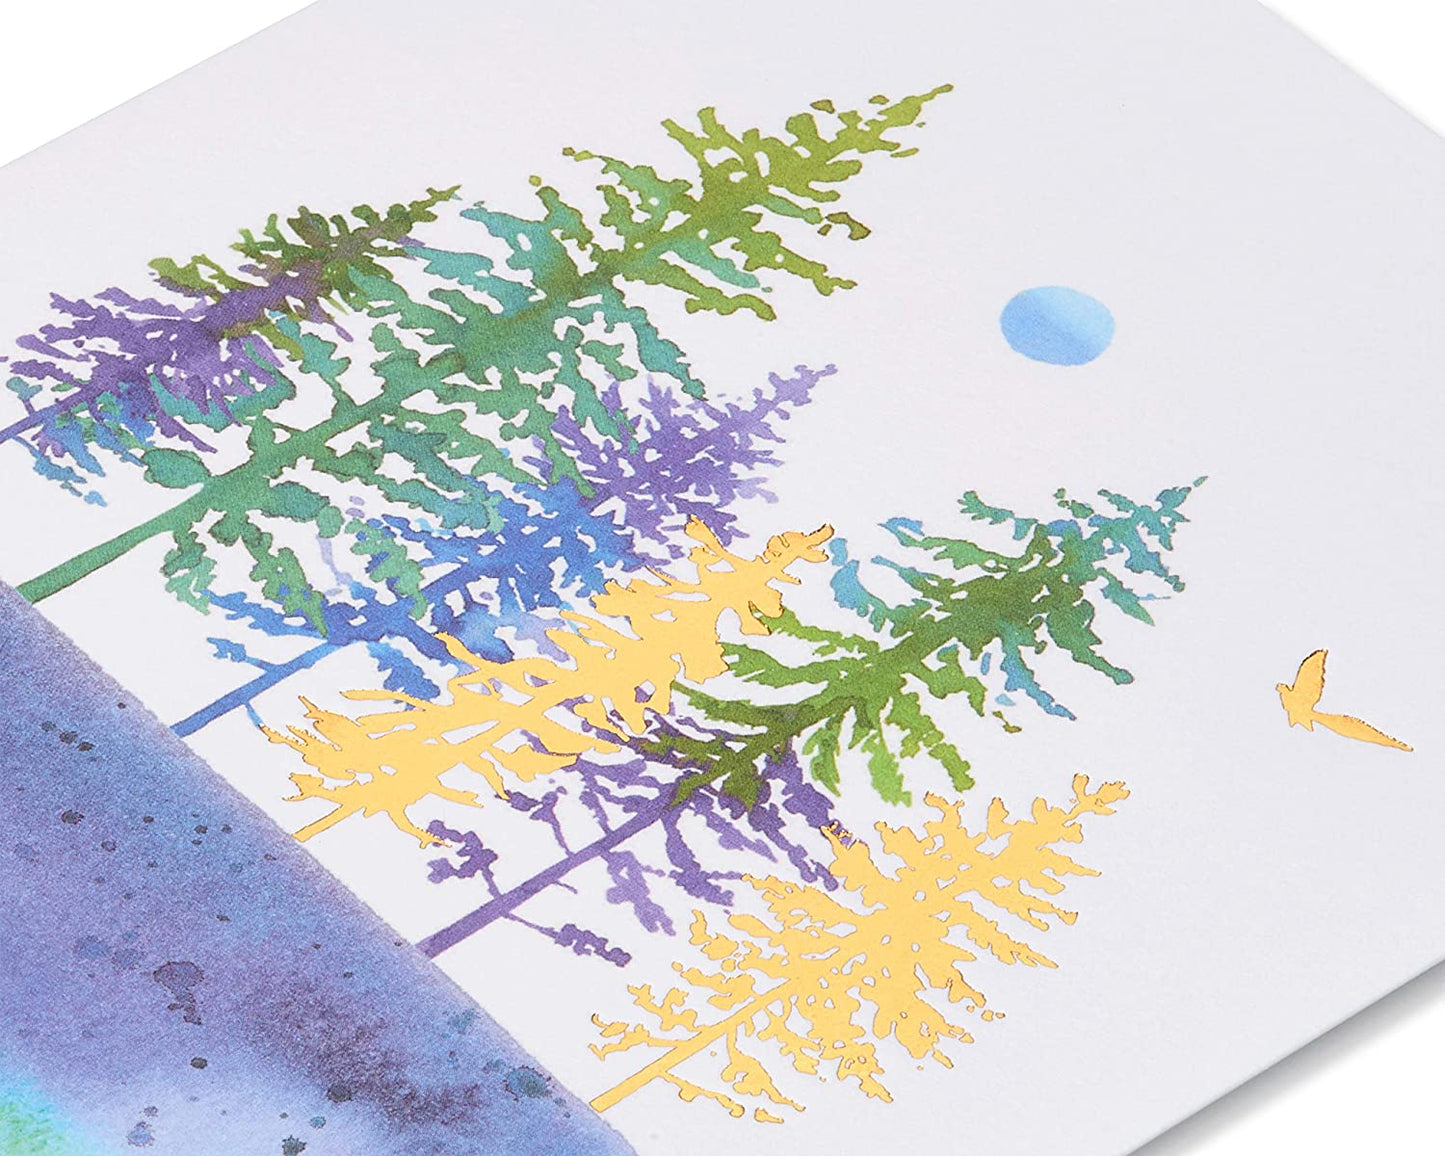 Papyrus Blank Card (Watercolor Trees)